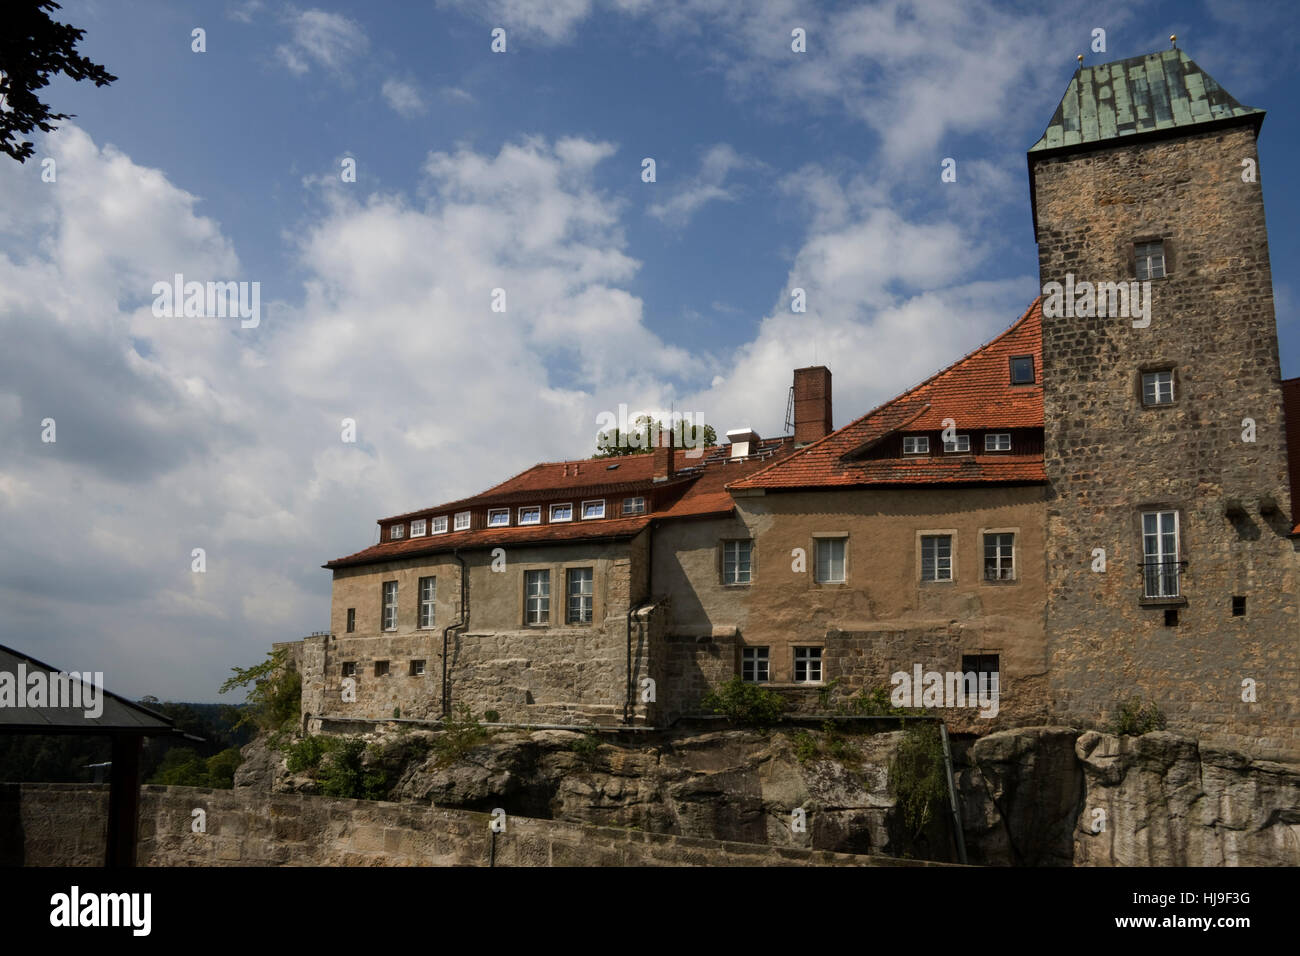 historical, romantic, sunbeams, cloudy, saxony, capped, style of construction, Stock Photo